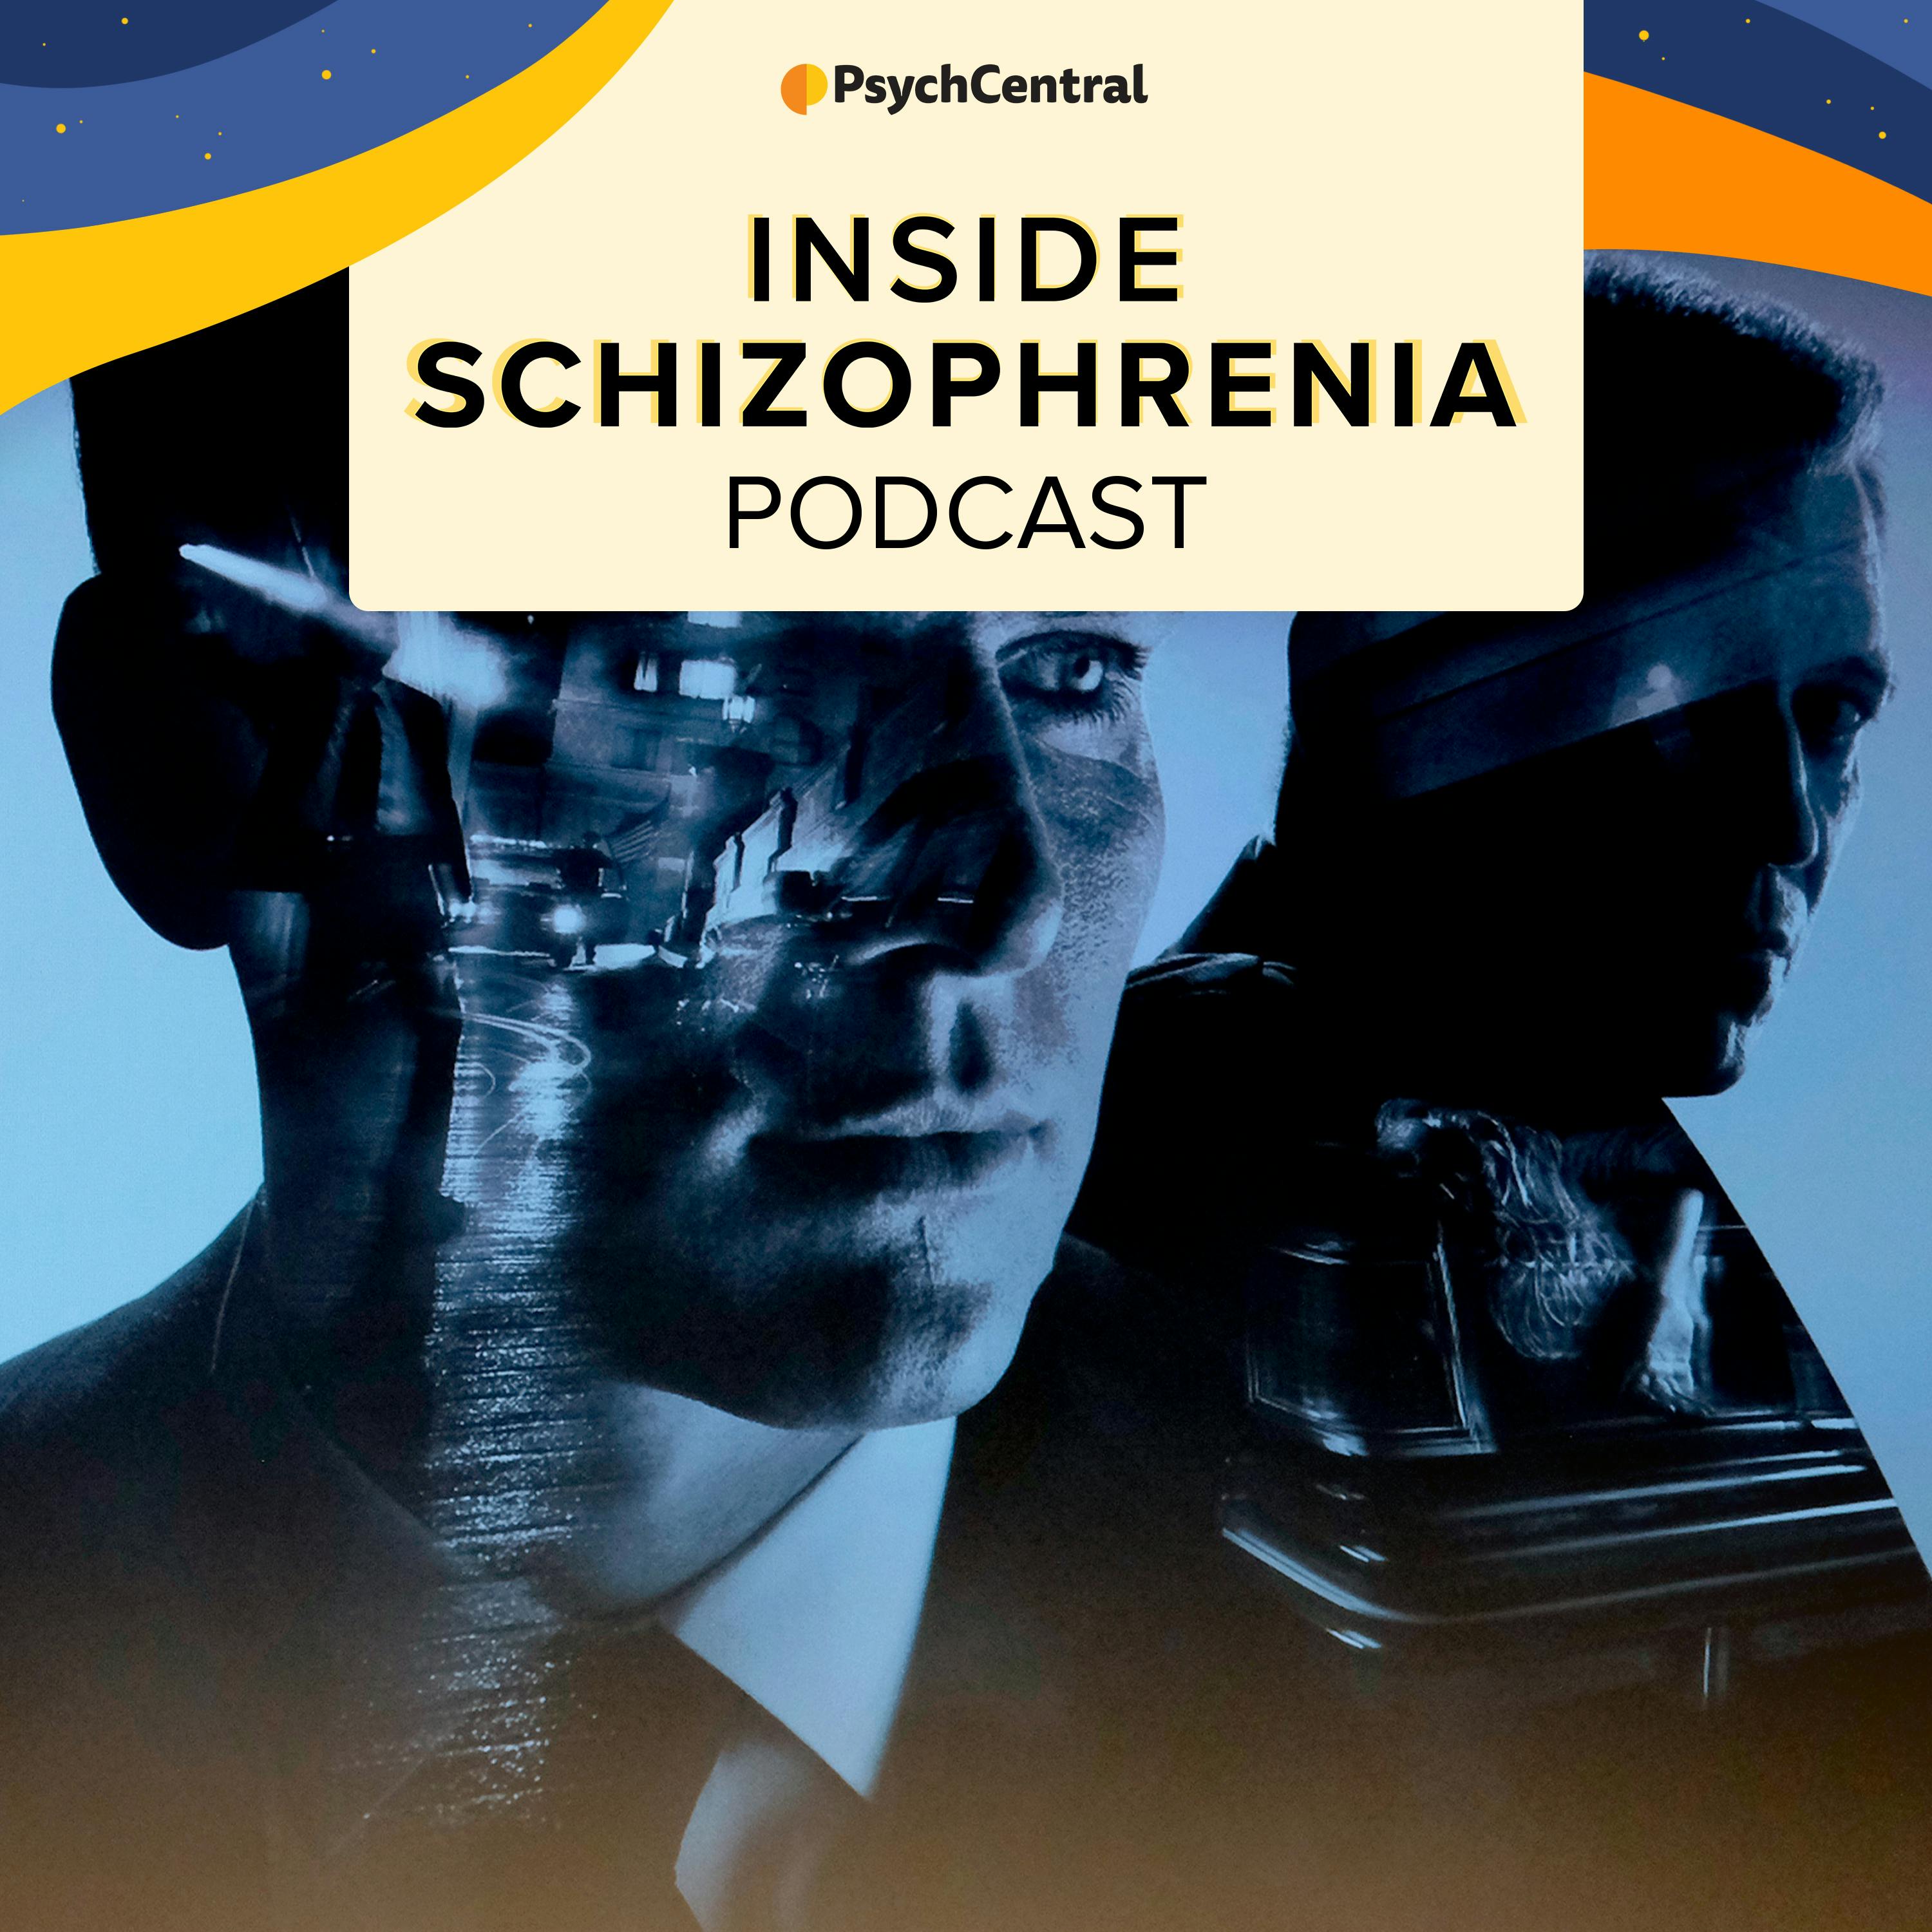 Serial Killers and Schizophrenia: Facts vs. Fiction